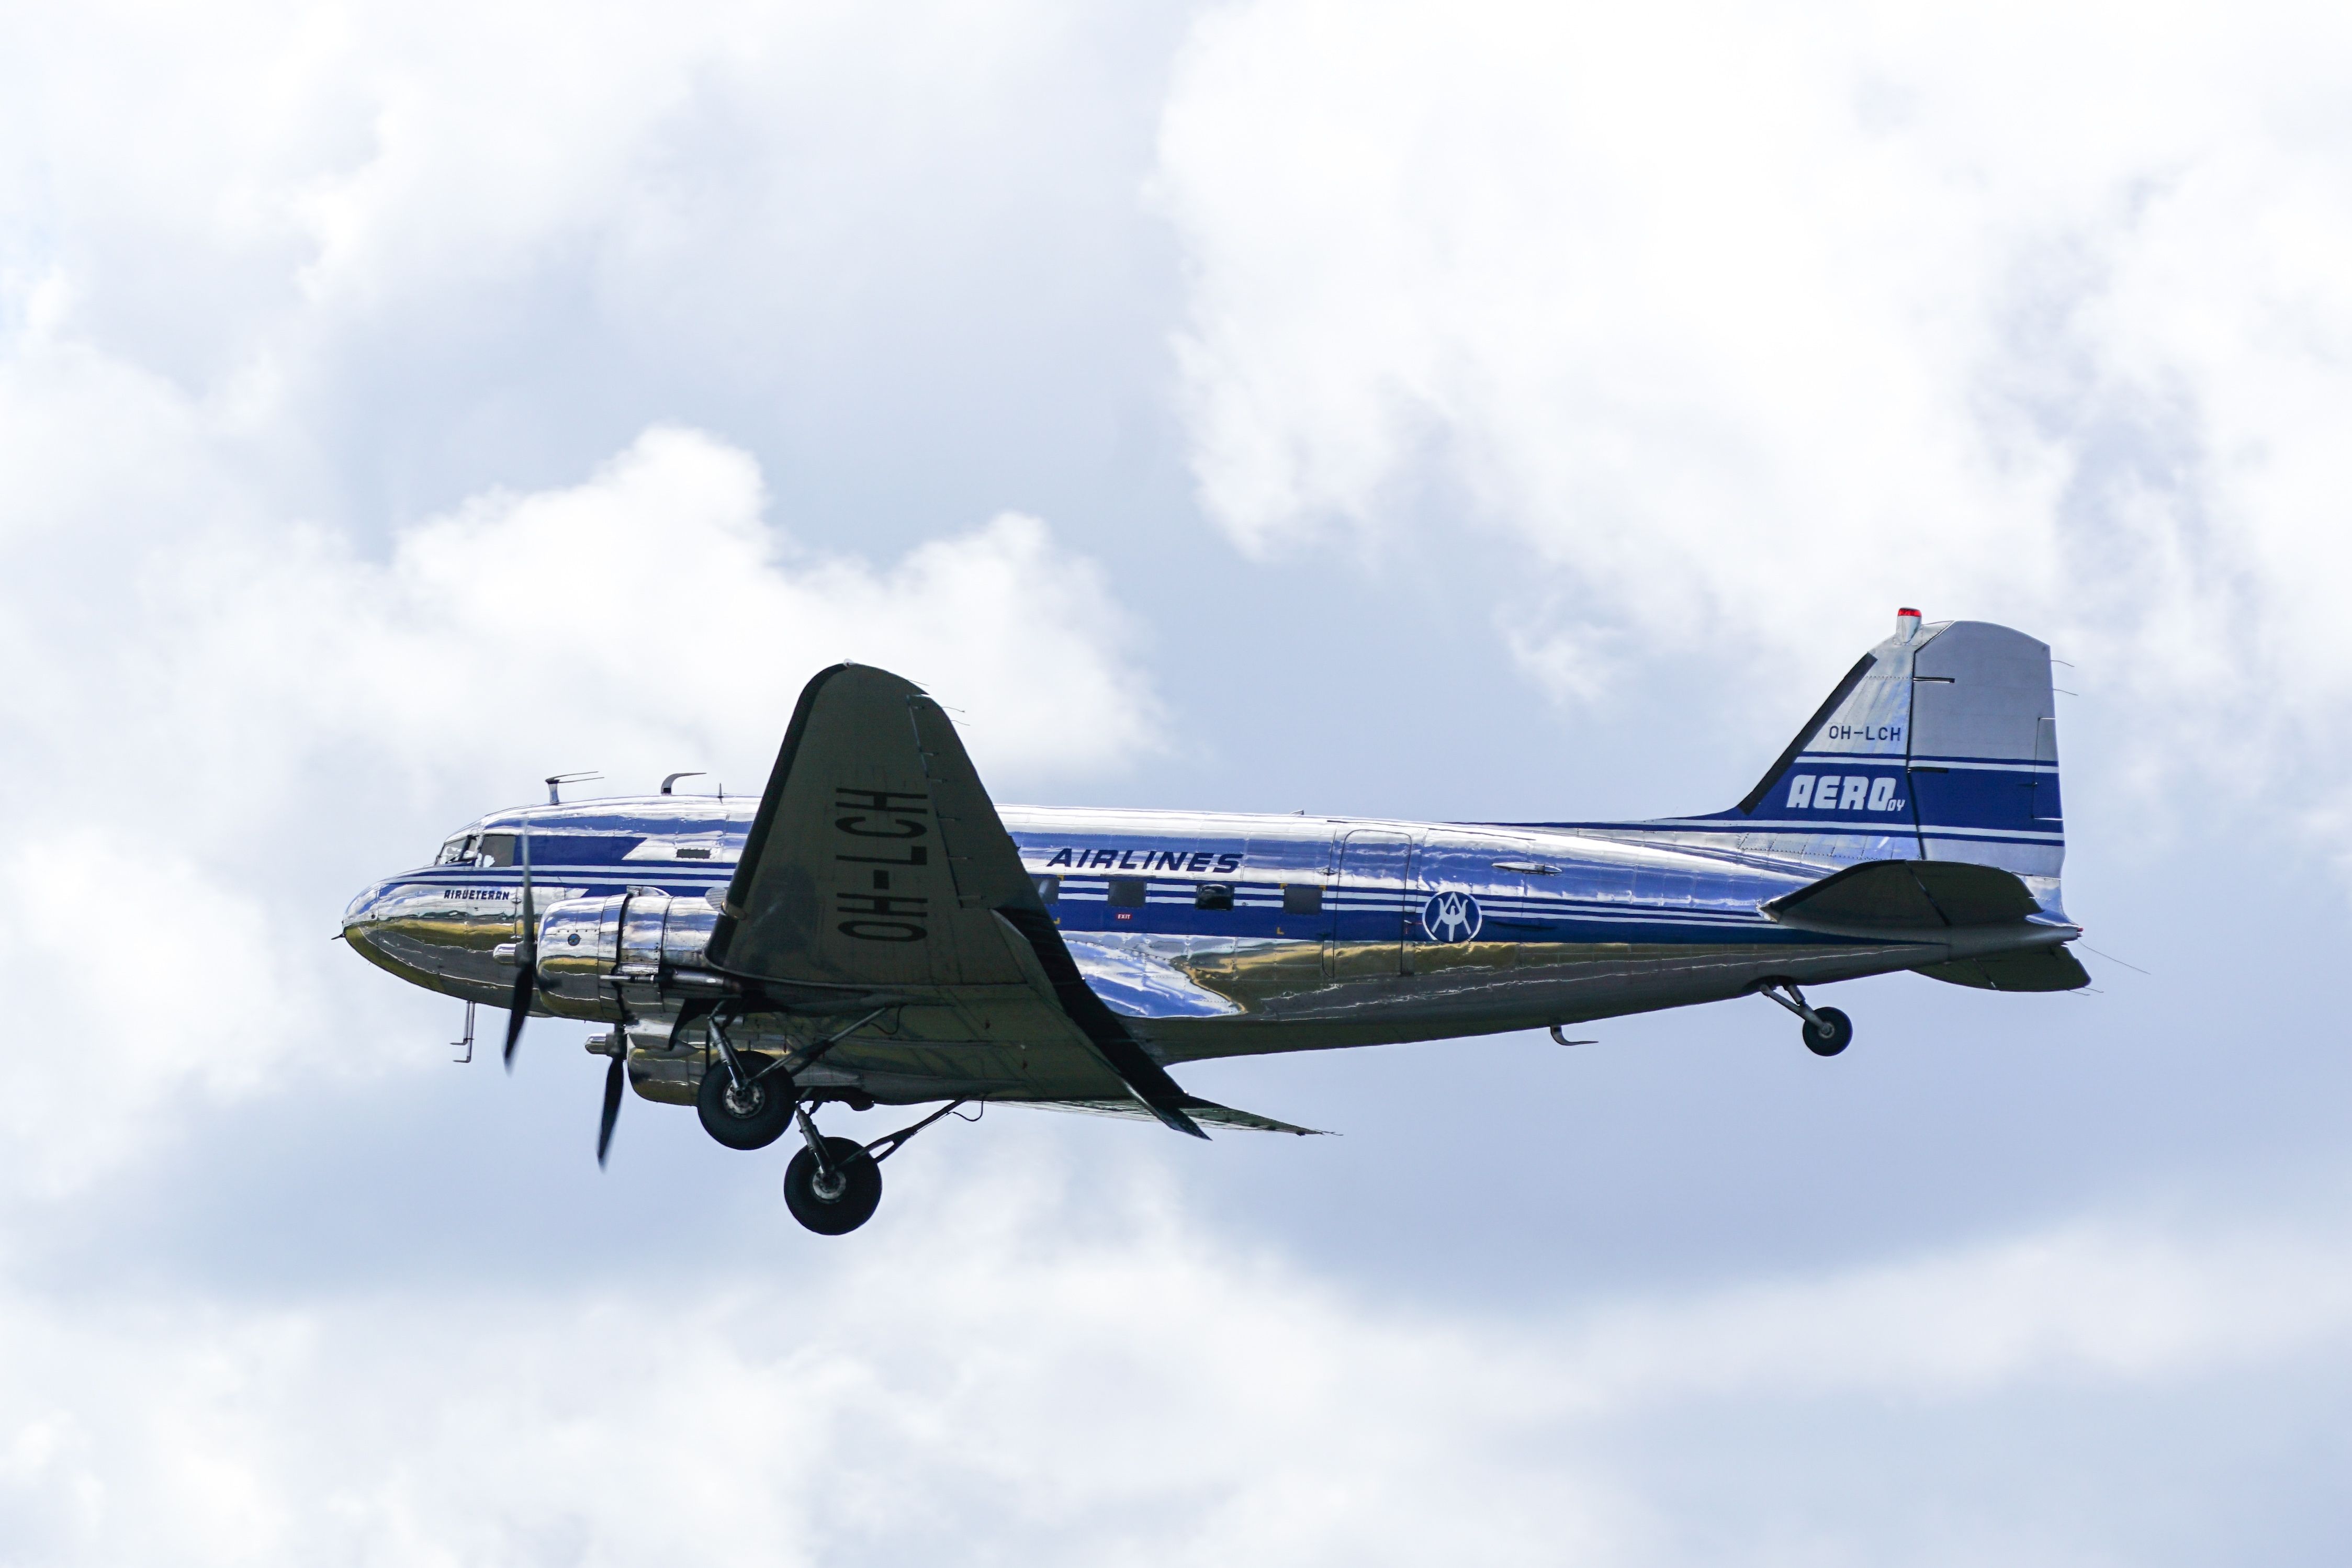 A Douglas DC-3 flying in the sky.